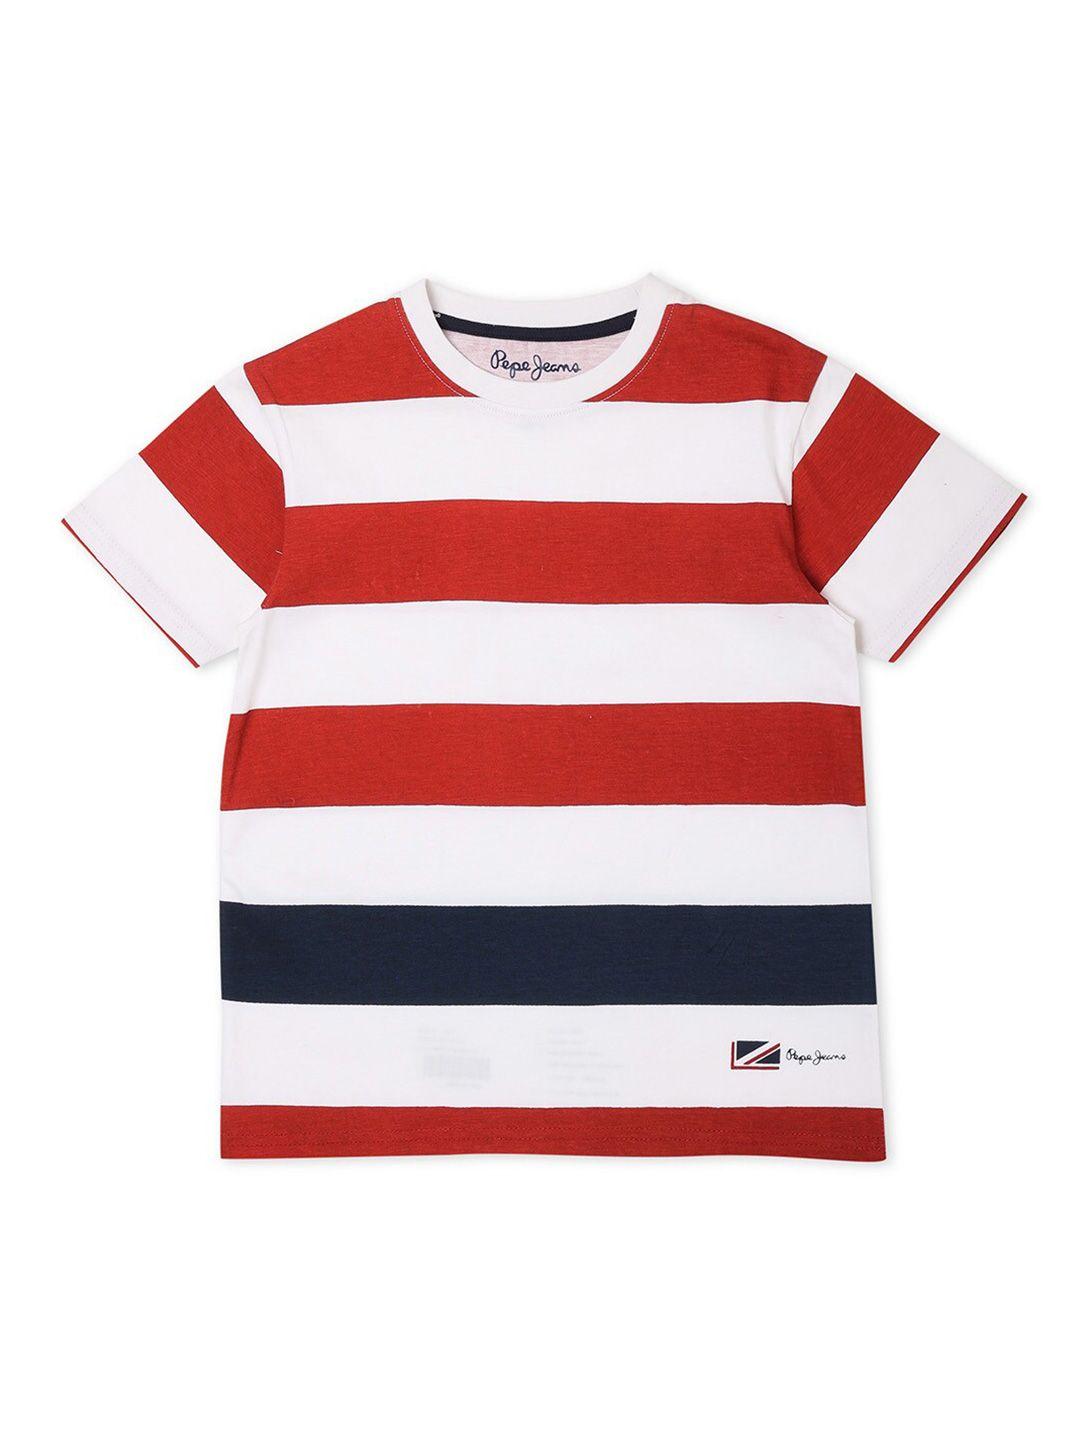 pepe jeans boys red striped t-shirt